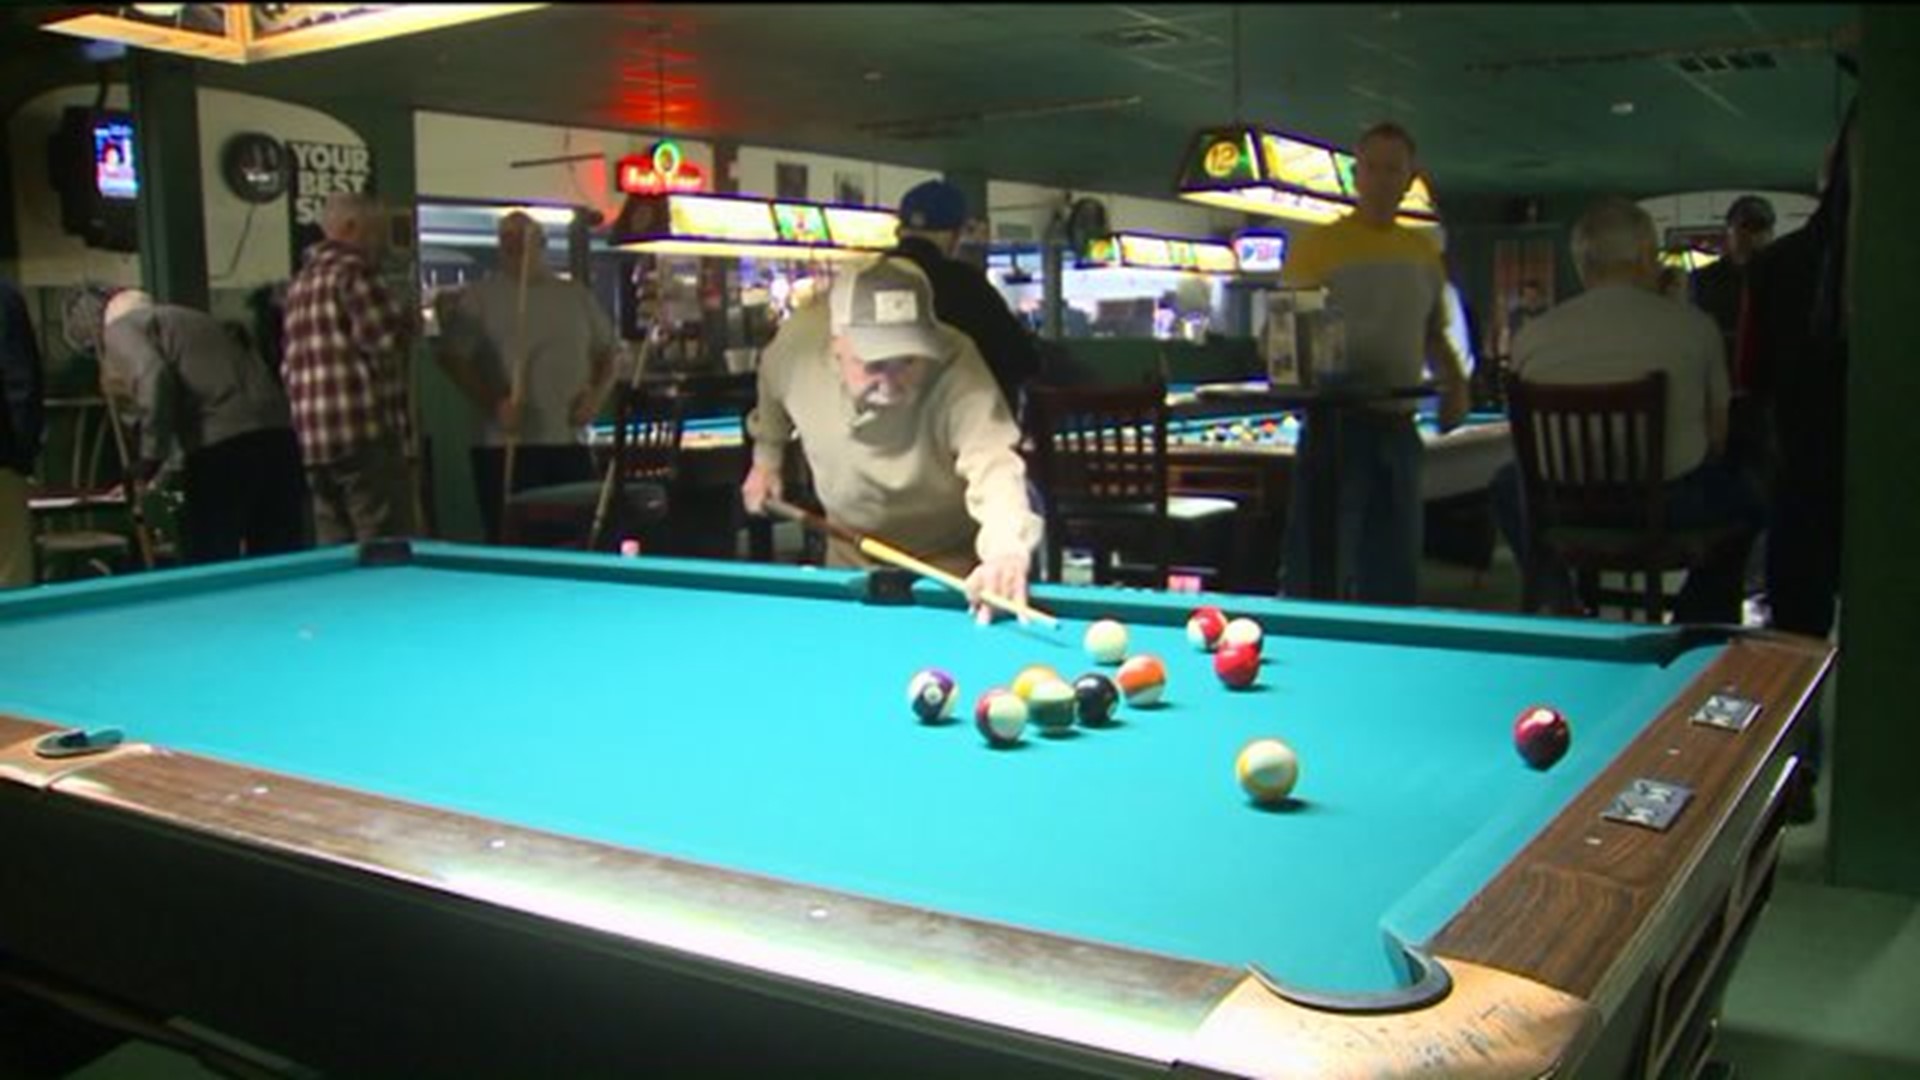 Banking on seniors at the pool table